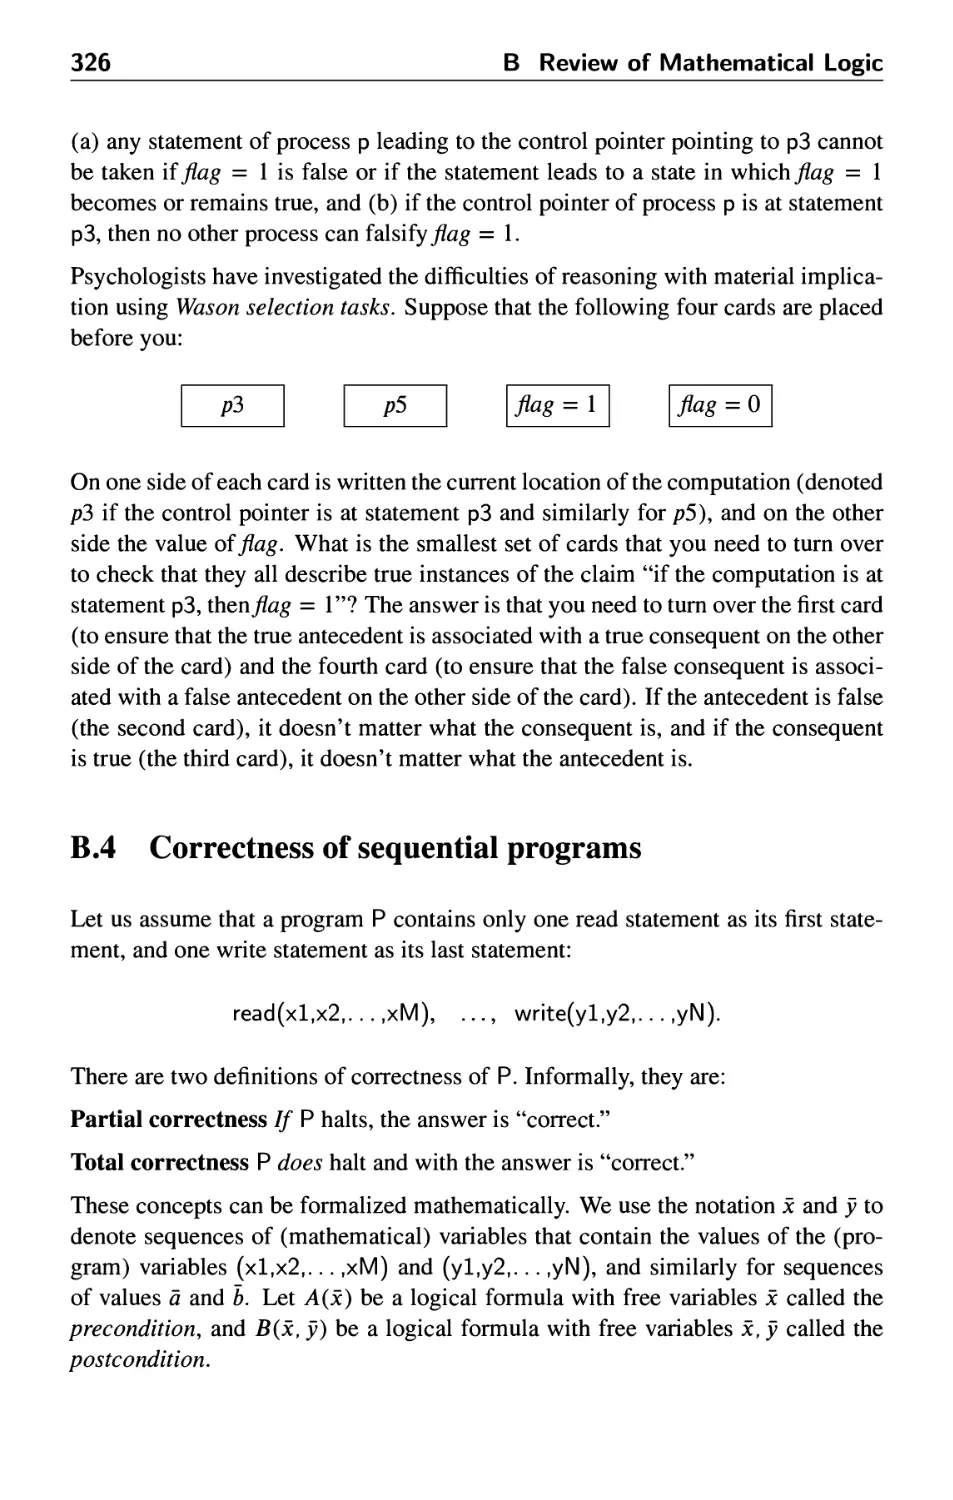 B.4 Correctness of sequential programs